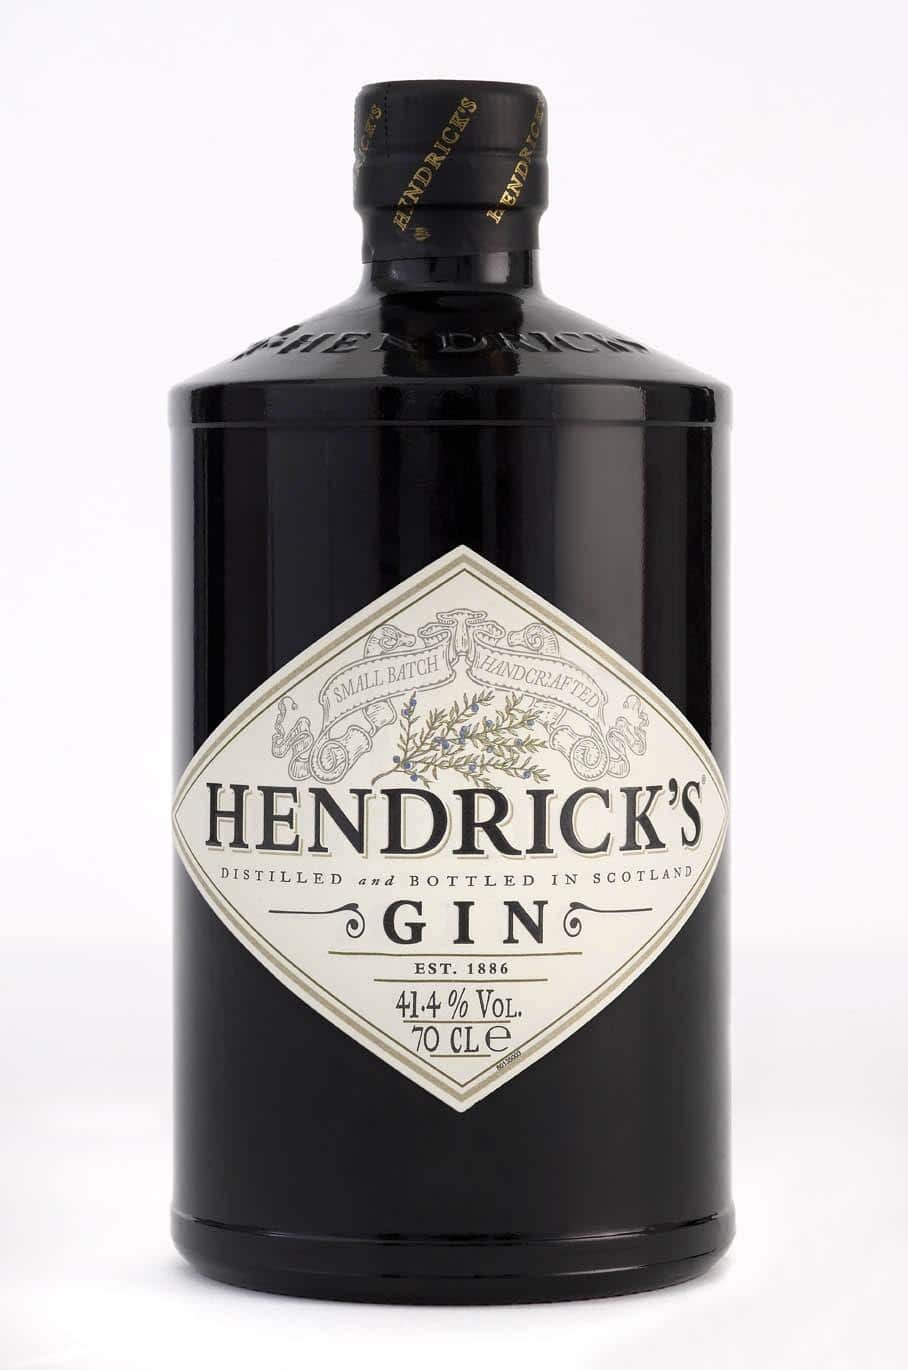 Hendrick's UK(41.4% ABV instead of 44% ABV) Review and Rating